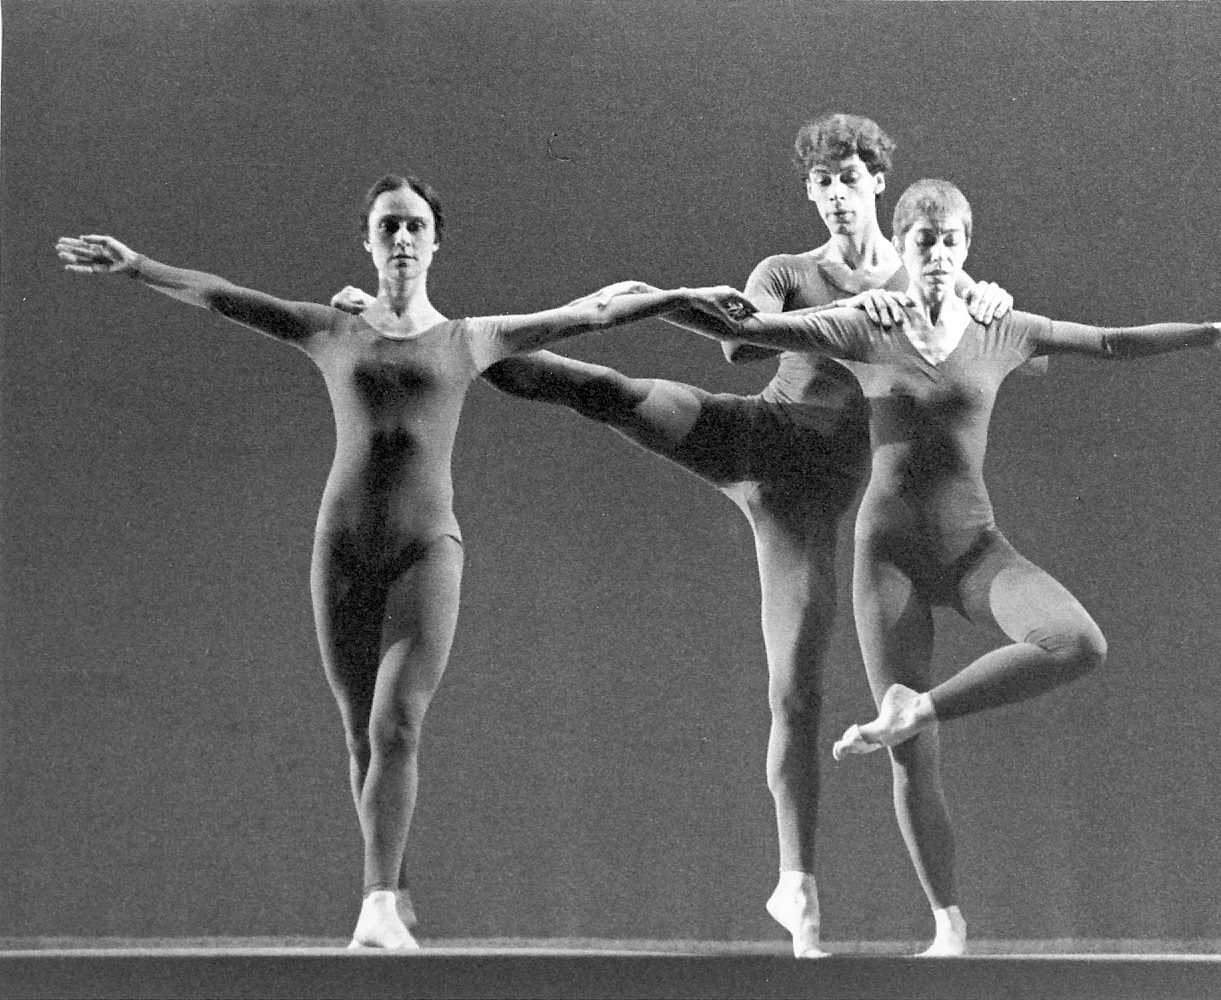 In a black and white archival image, three dancers in identical, long-sleeved unitards intertwine while facing downstage. One woman stands with her feet in a loose fifth, arms extended side. A male dancer balances on relevé with his leg extended side, holding the shoulders of a woman who stands in an overcrossed retiré while holding the hand of the first woman.